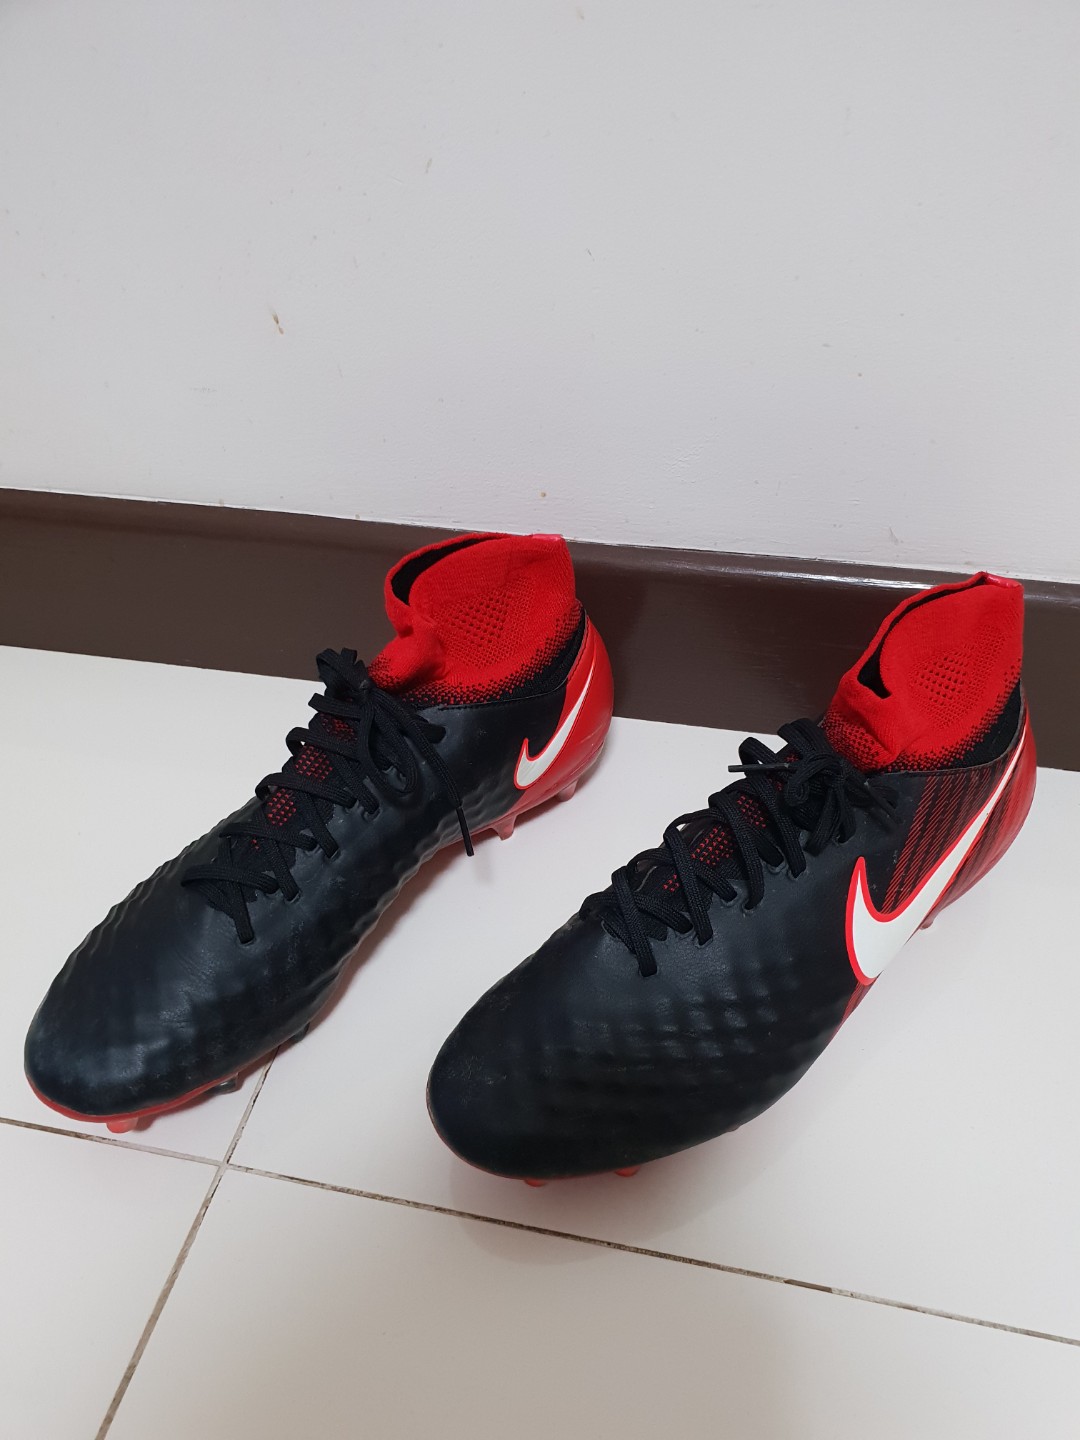 Men Clothing, Shoes & Accessories Nike Magista Opus II SG Pro